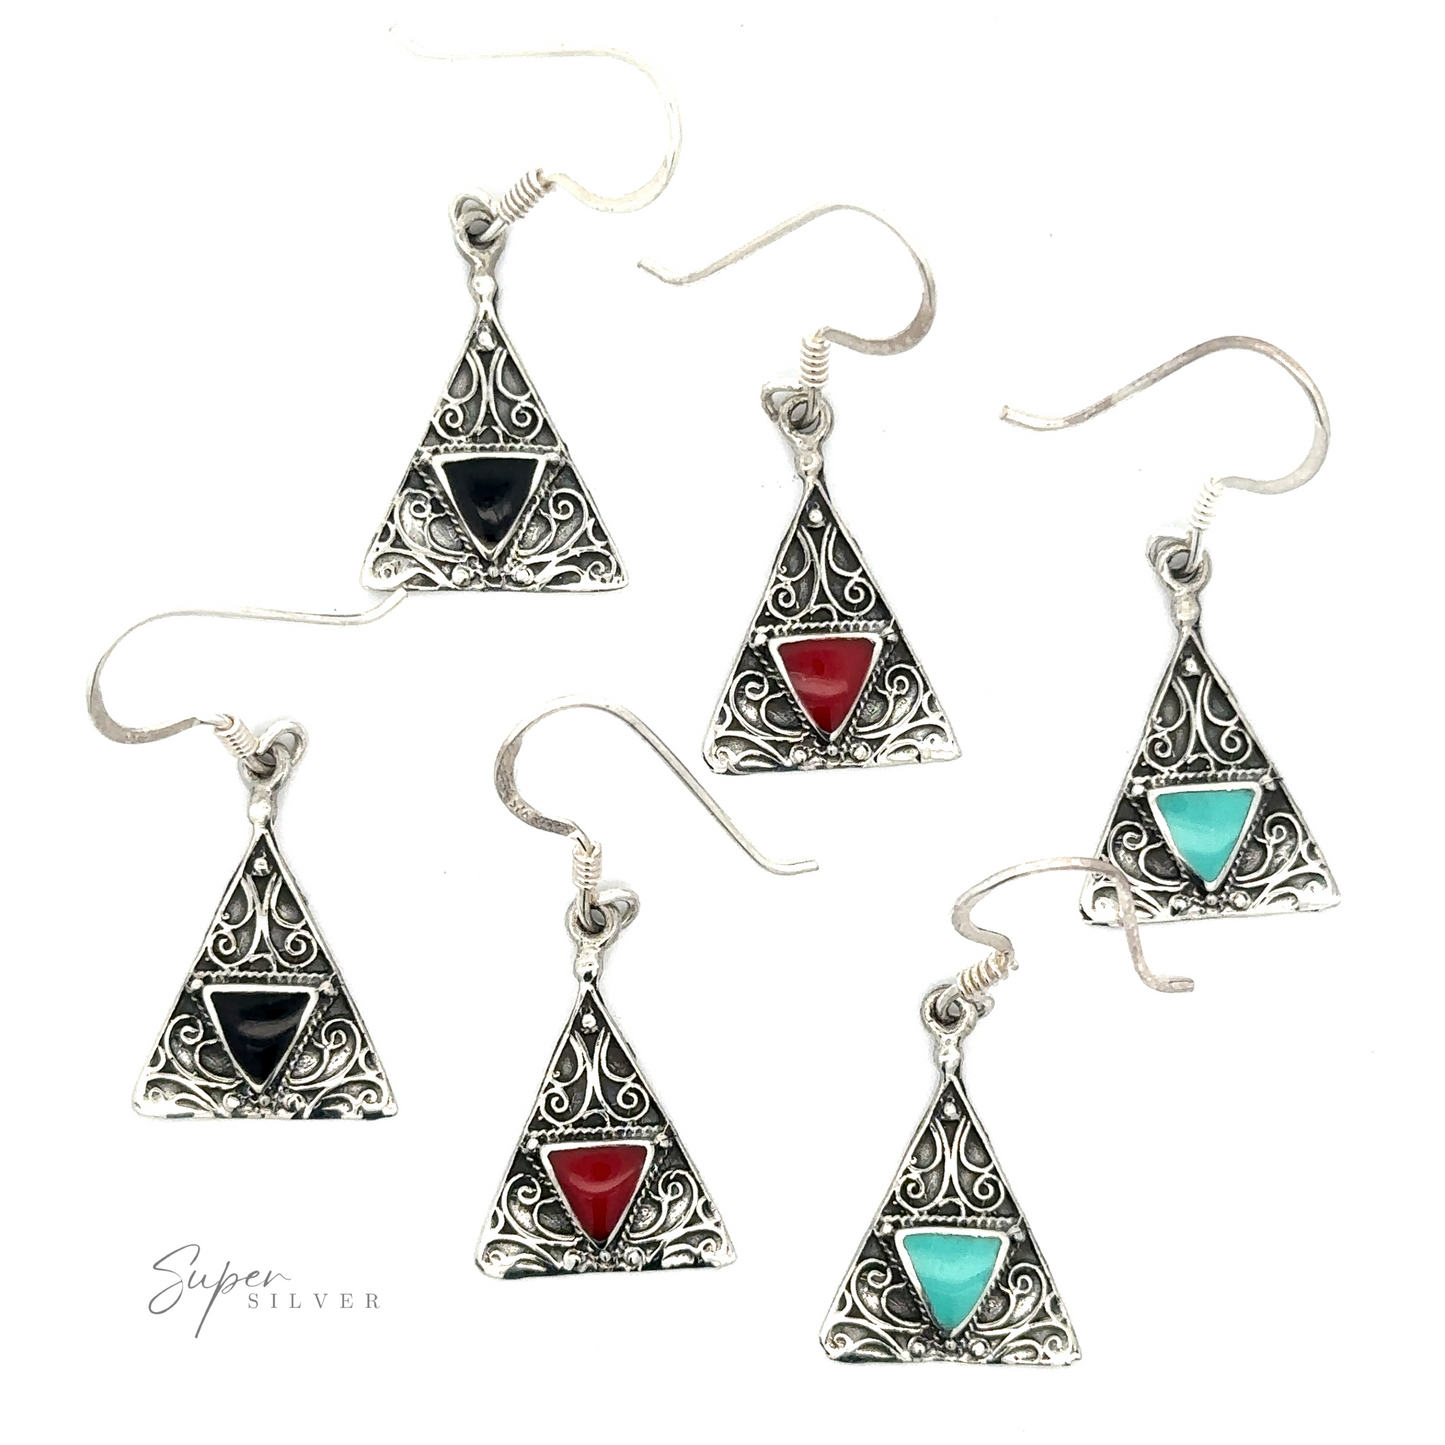 Six Freestyle Design Triangle Shape Inlaid Earrings with intricate designs, each featuring a gem in the center: two black, two red coral stones, and two turquoise. The word "Super Silver" is in the bottom left corner.